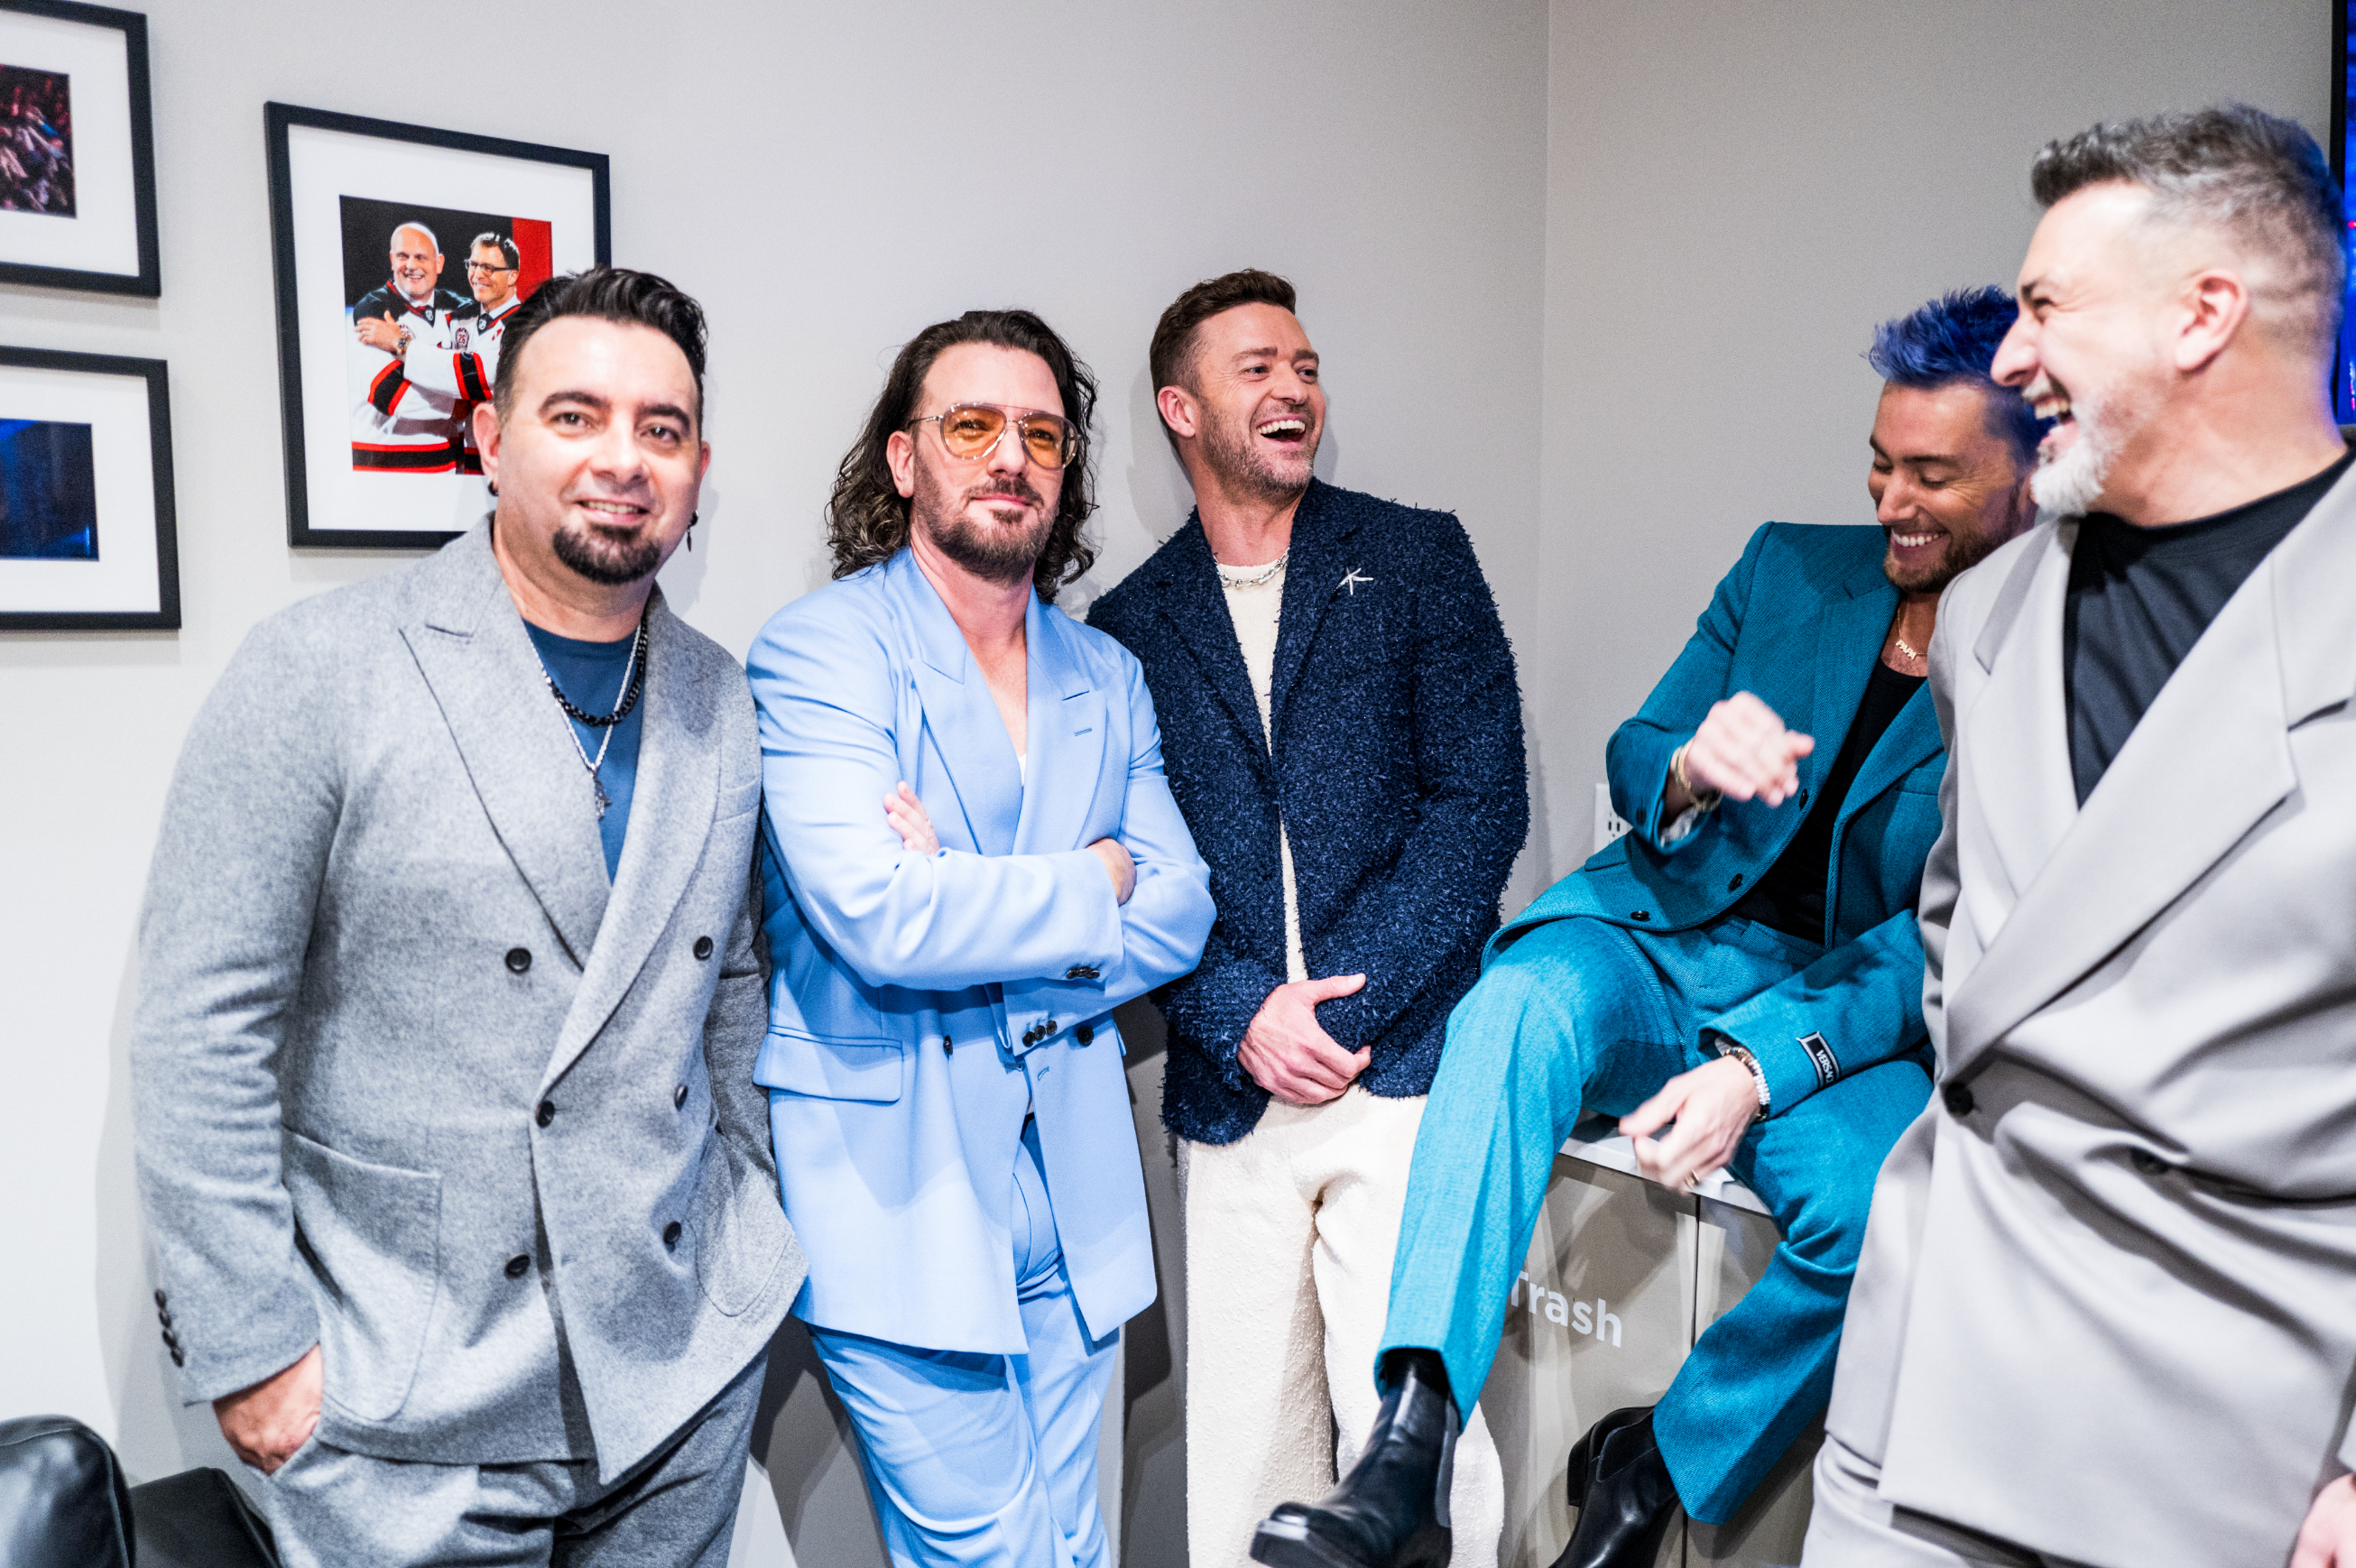 The members of NSYNC smiling and standing together